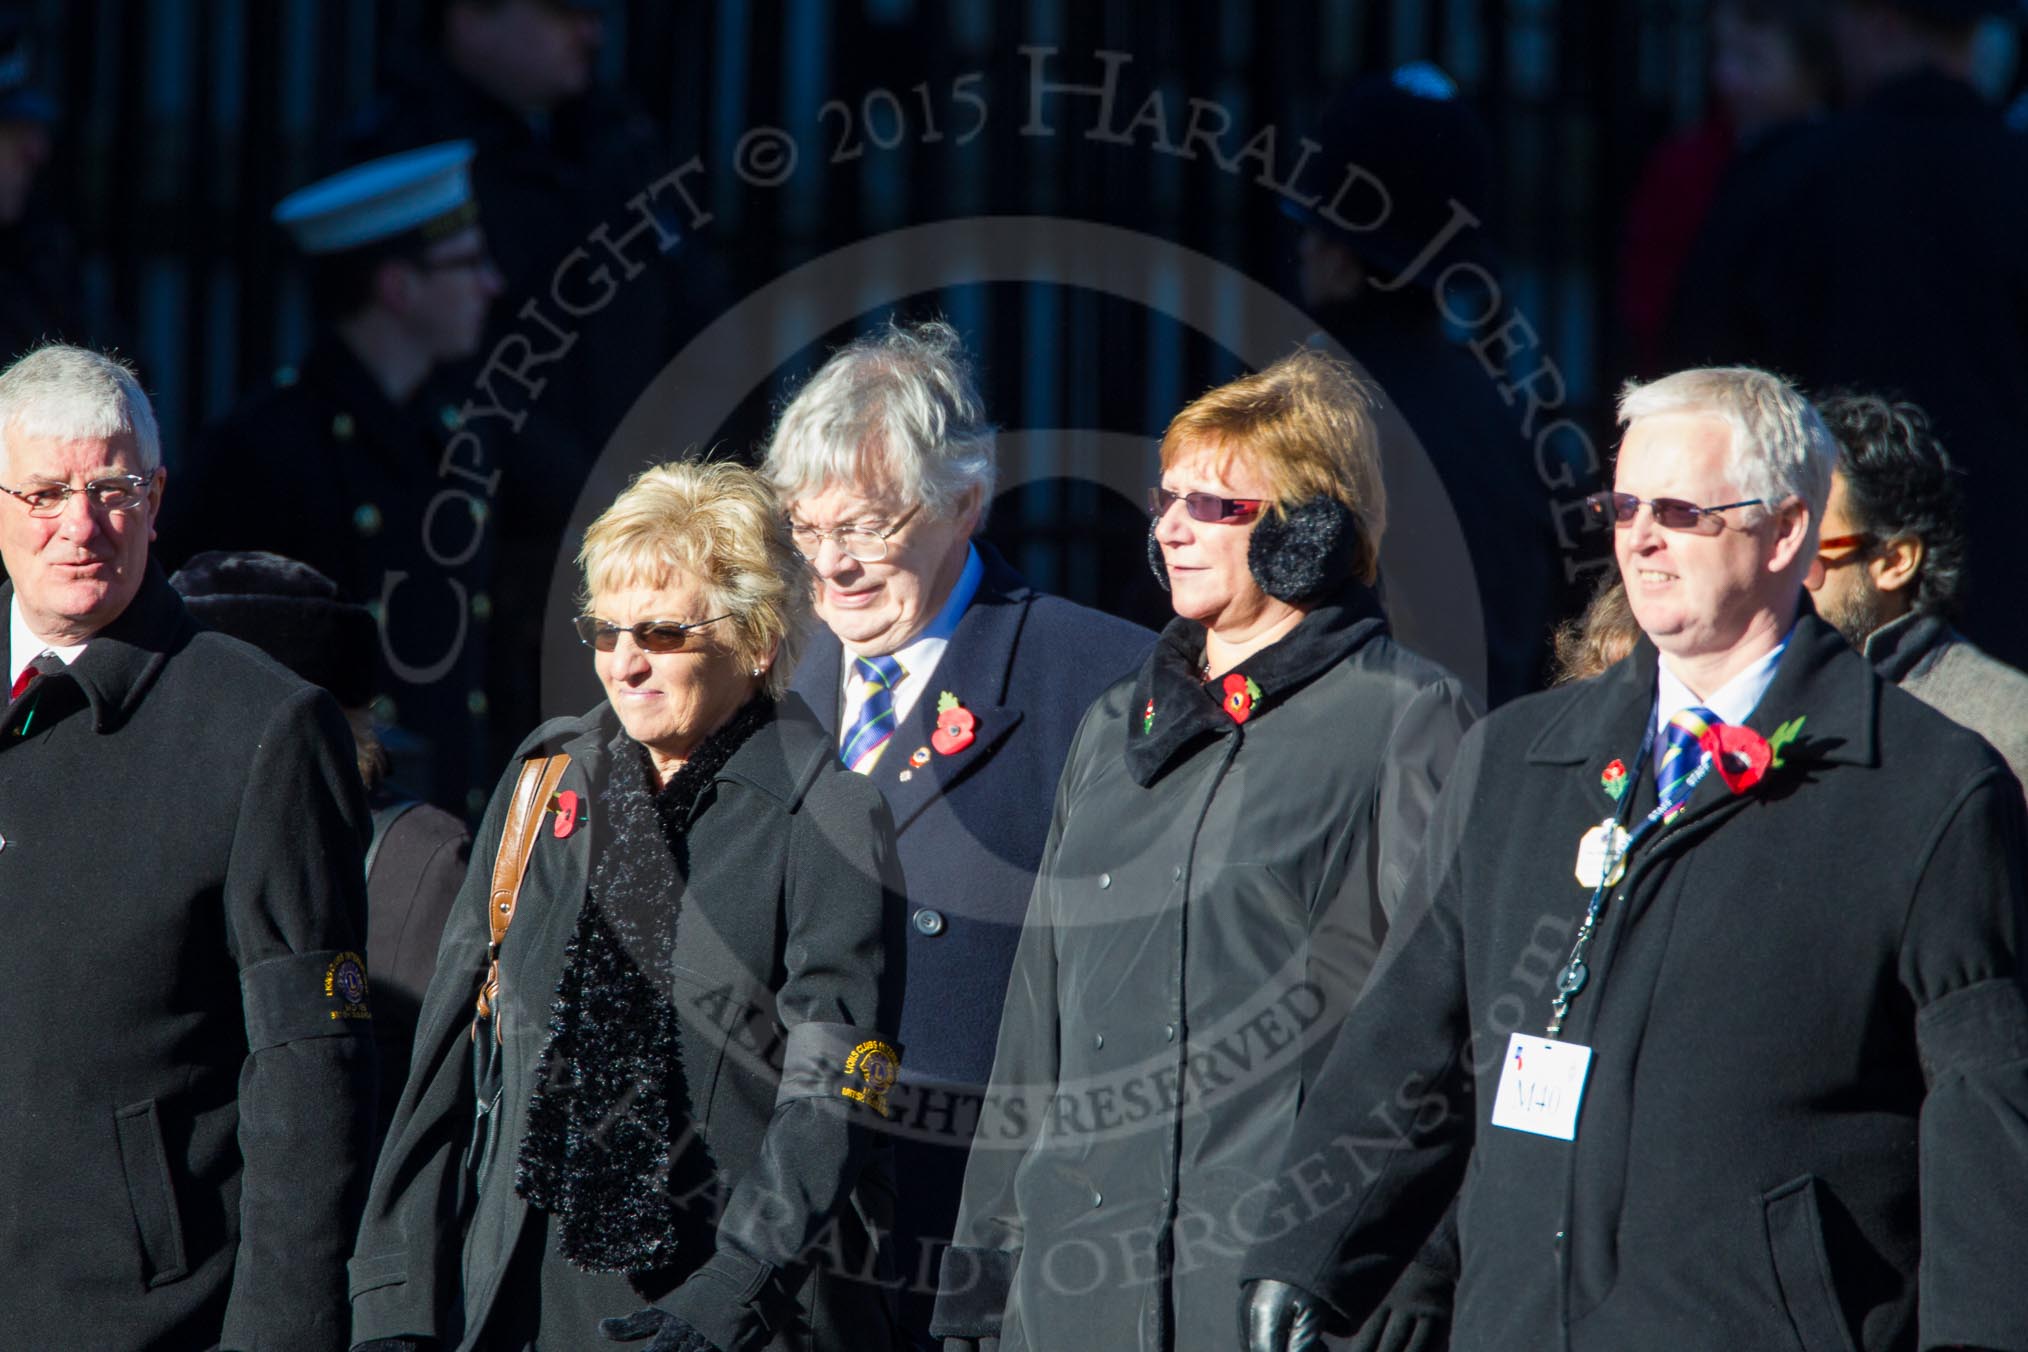 Remembrance Sunday Cenotaph March Past 2013: M40 - Lions Club International..
Press stand opposite the Foreign Office building, Whitehall, London SW1,
London,
Greater London,
United Kingdom,
on 10 November 2013 at 12:14, image #2182